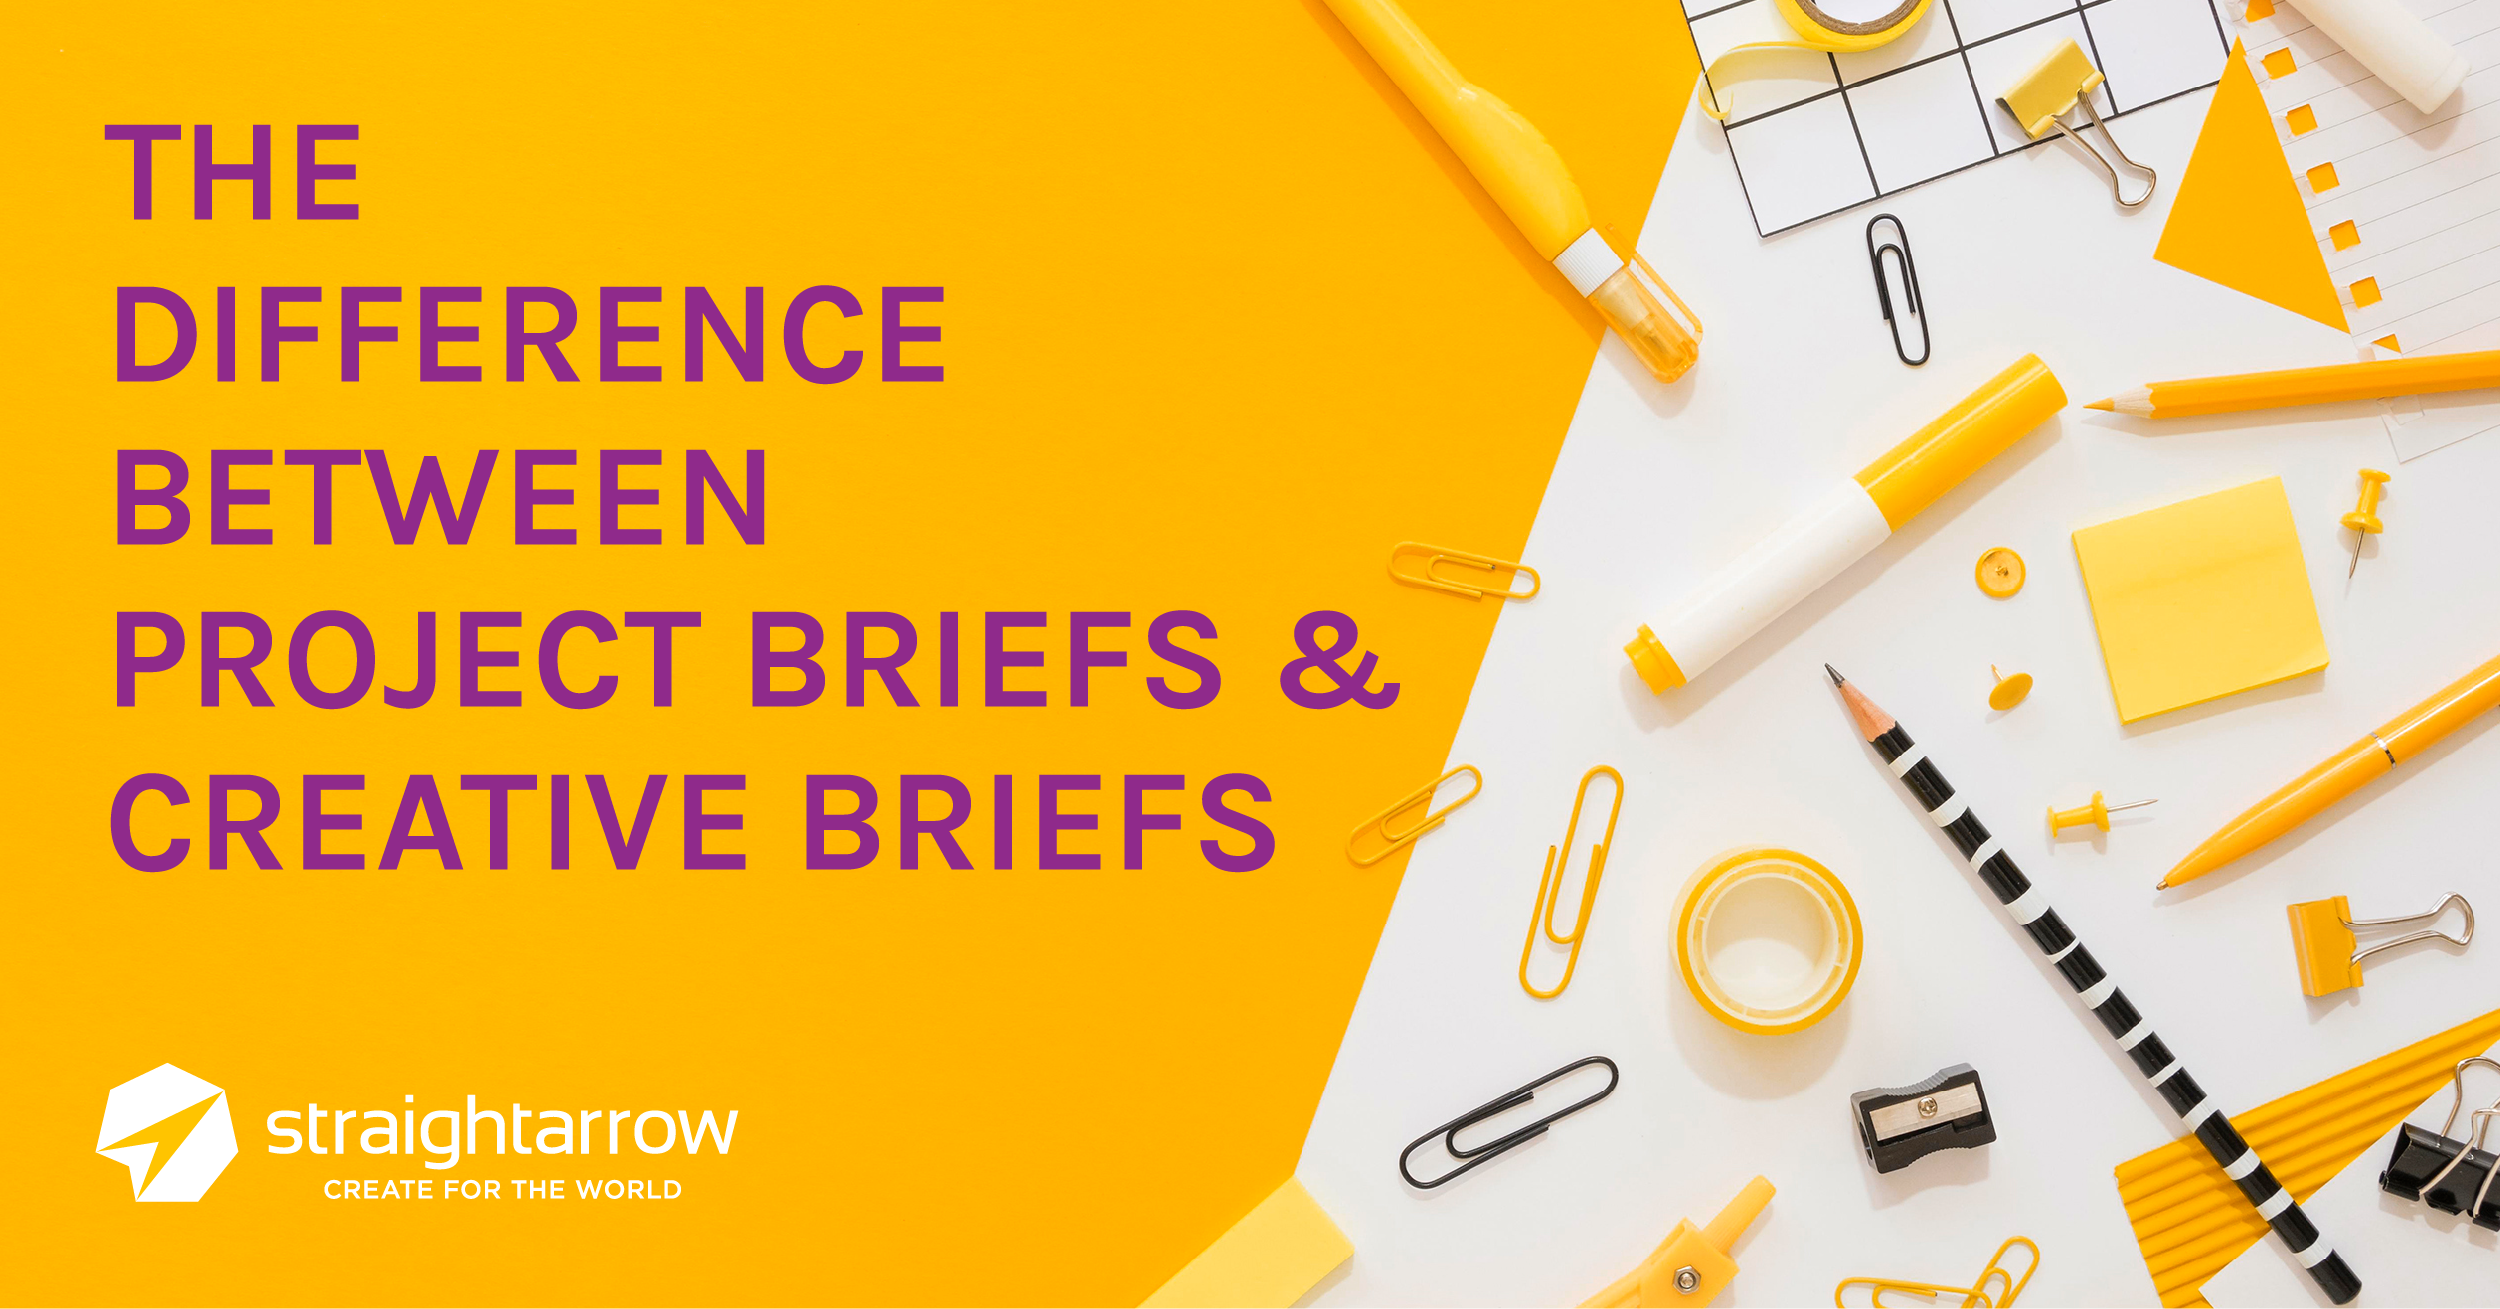 Making it Brief: The Difference between Project Briefs and Creative Briefs